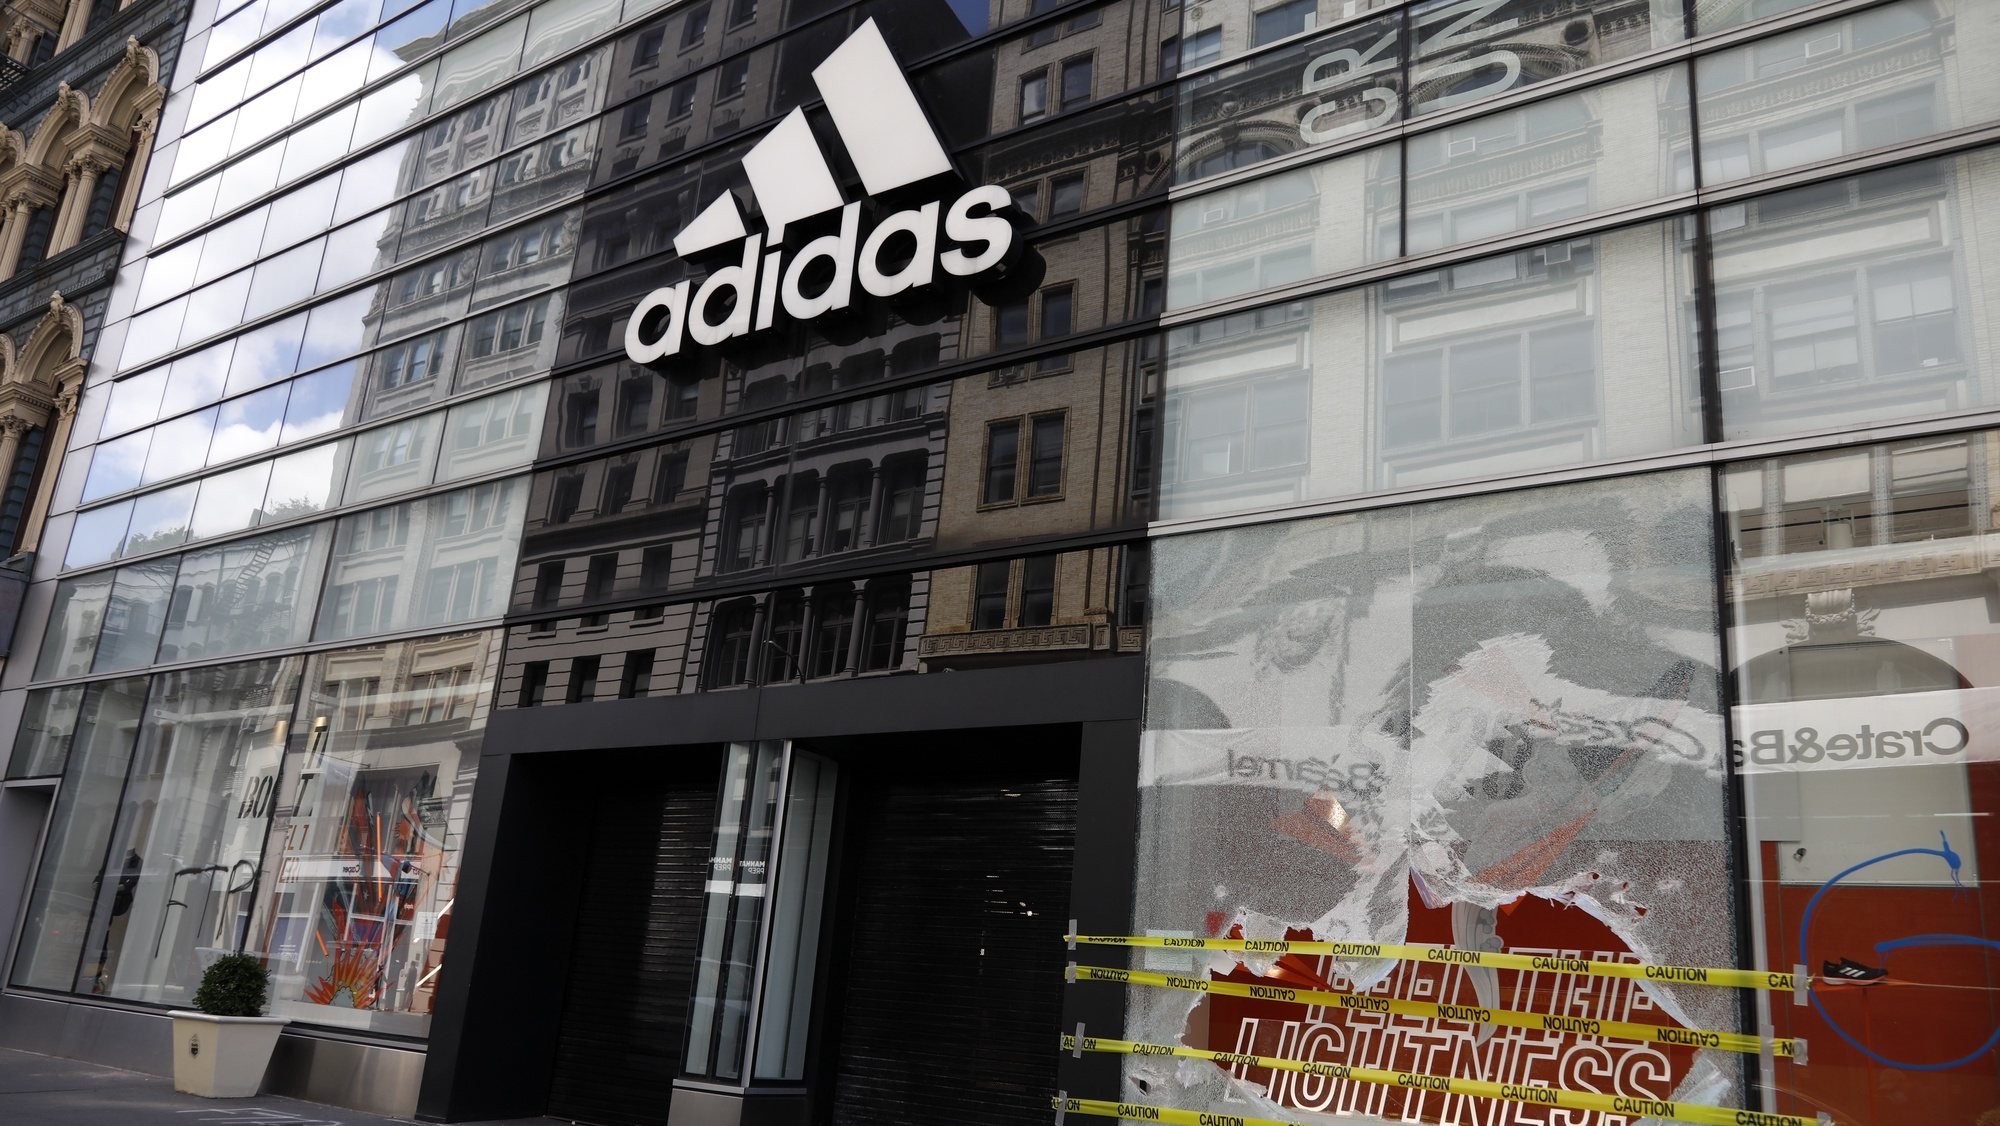 epa08459077 The Adidas Originals store shows a broken window on West Broadway after looting riots a night earlier as part of the response by protesters to George Floyd&#039;s death, in New York, New York, USA, 01 June 2020. A bystander&#039;s video posted online on 25 May, shows George Floyd pleading with arresting officers that he couldn&#039;t breathe as an officer knelt on his neck. The unarmed black man soon became unresponsive, and was later pronounced dead. According to reports on 29 May, Derek Chauvin, the police officer at the center of the incident, has been taken into custody and charged with murder in the death of George Floyd.  EPA/JASON SZENES